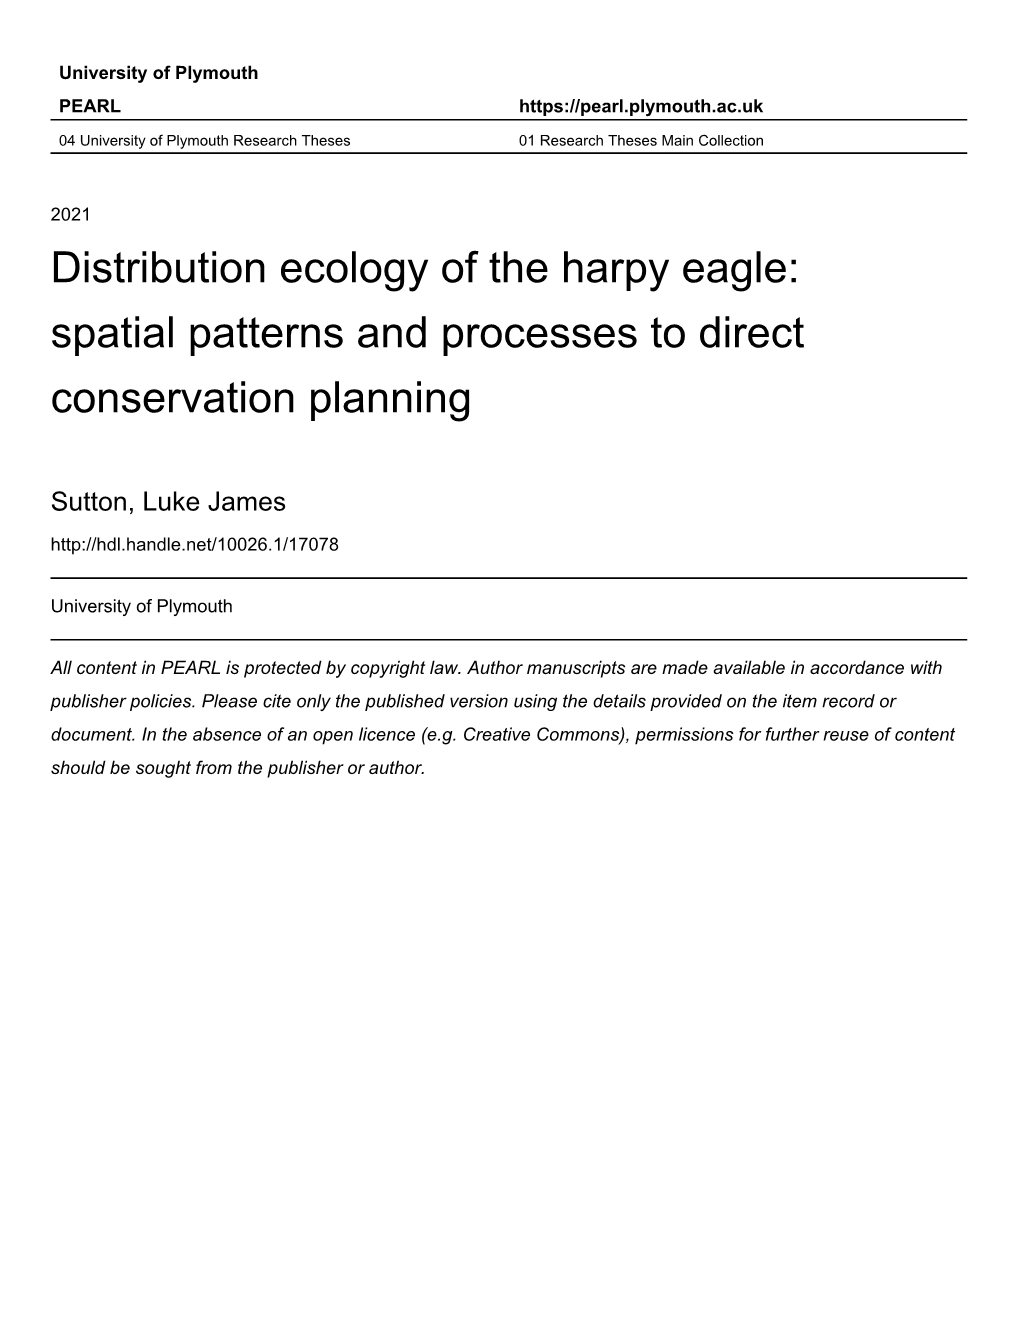 Distribution Ecology of the Harpy Eagle: Spatial Patterns and Processes to Direct Conservation Planning